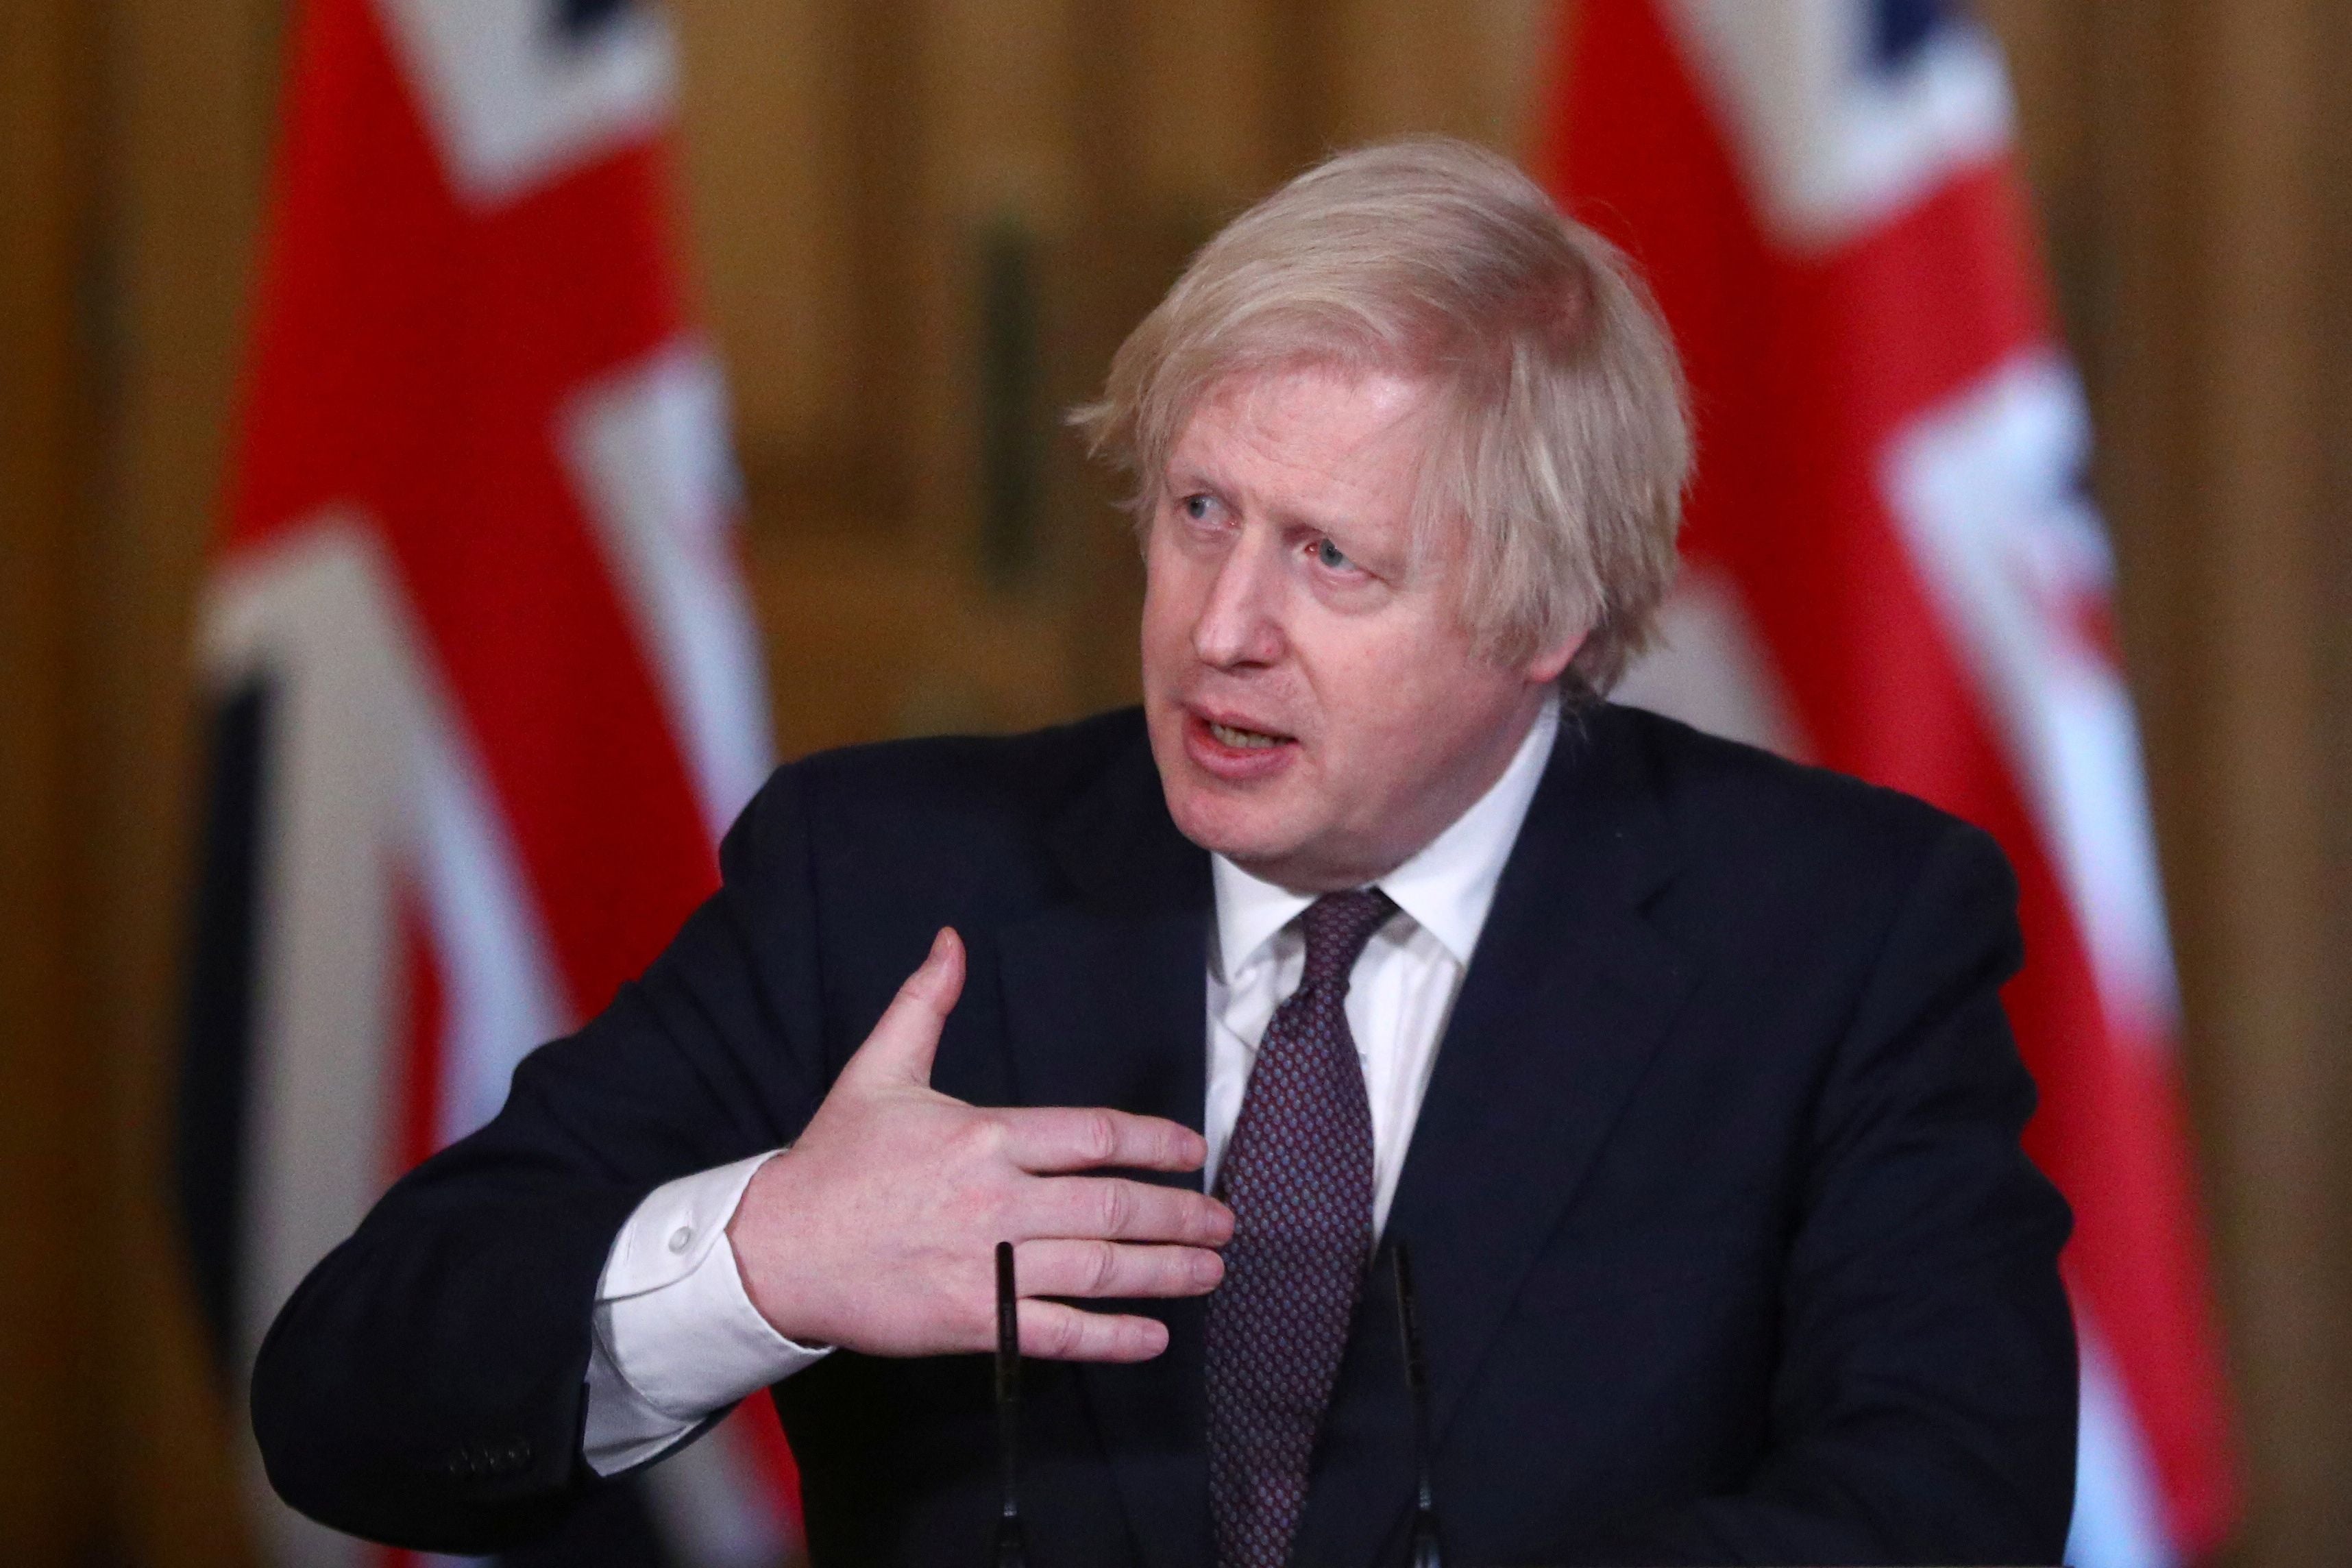 Boris Johnson during a virtual press conference inside 10 Downing Street on 8 March, 2021